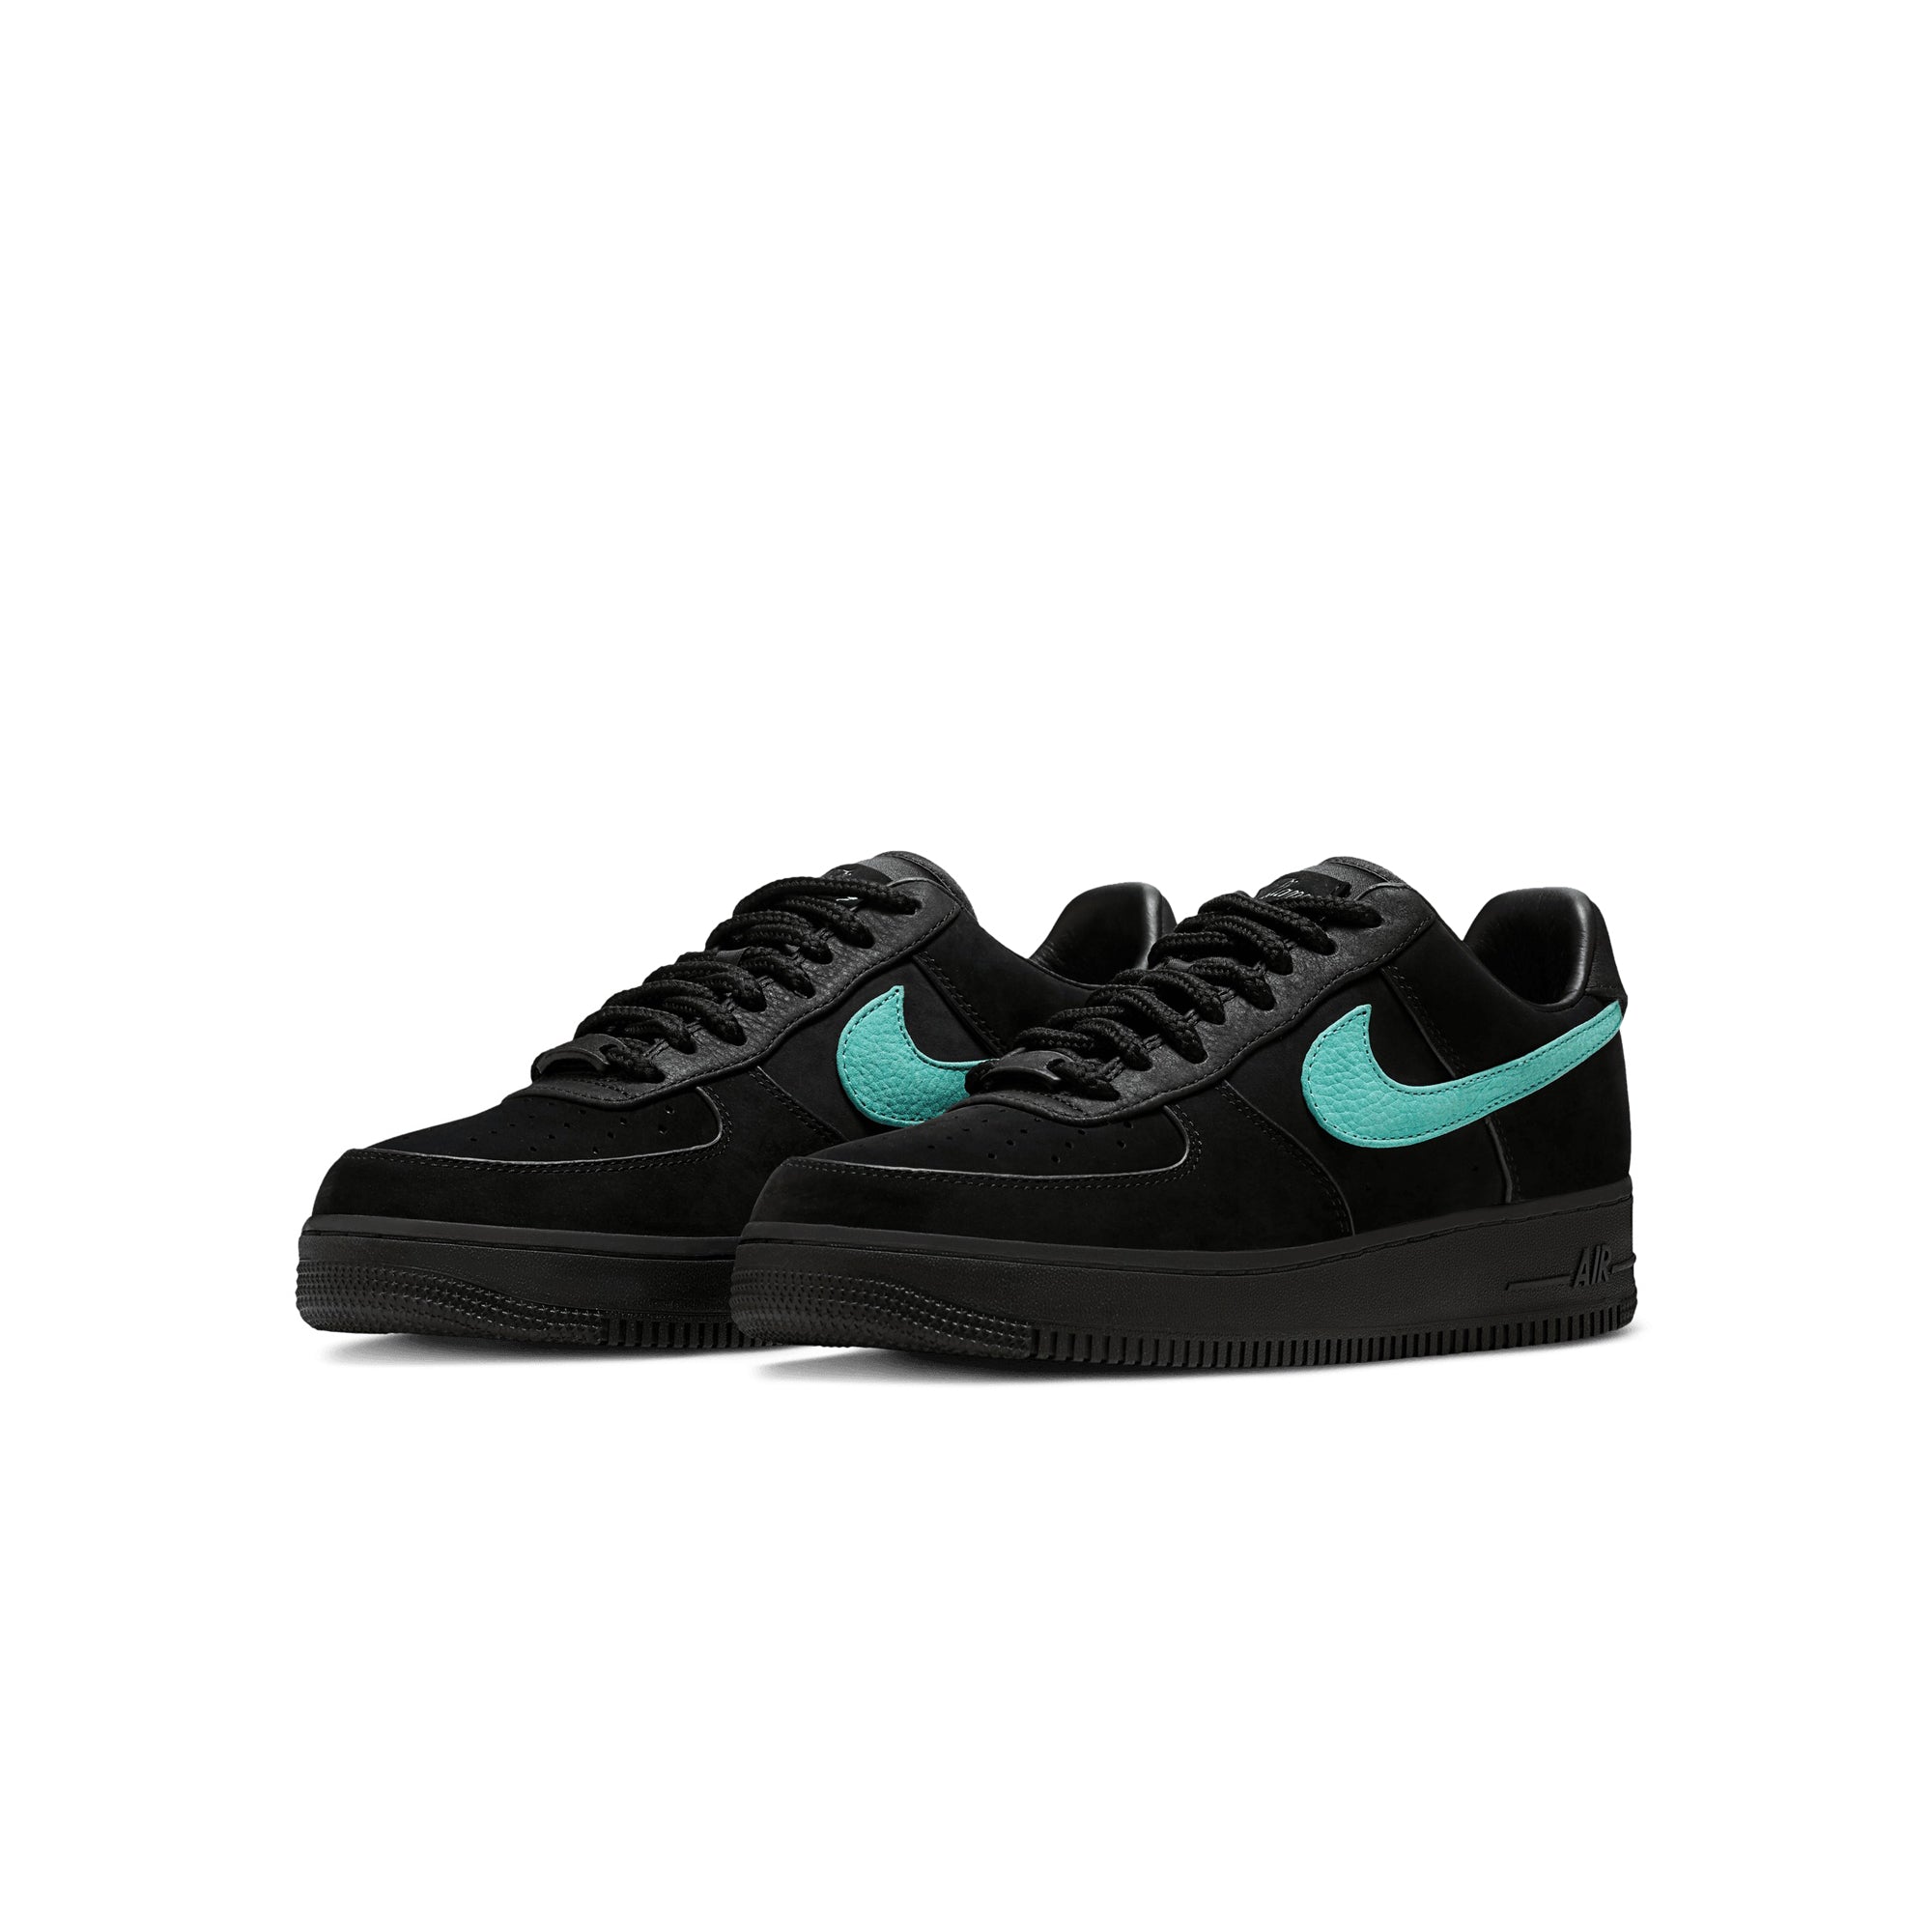 Official Look at the Tiffany & Co. x Nike Air Force 1 Low